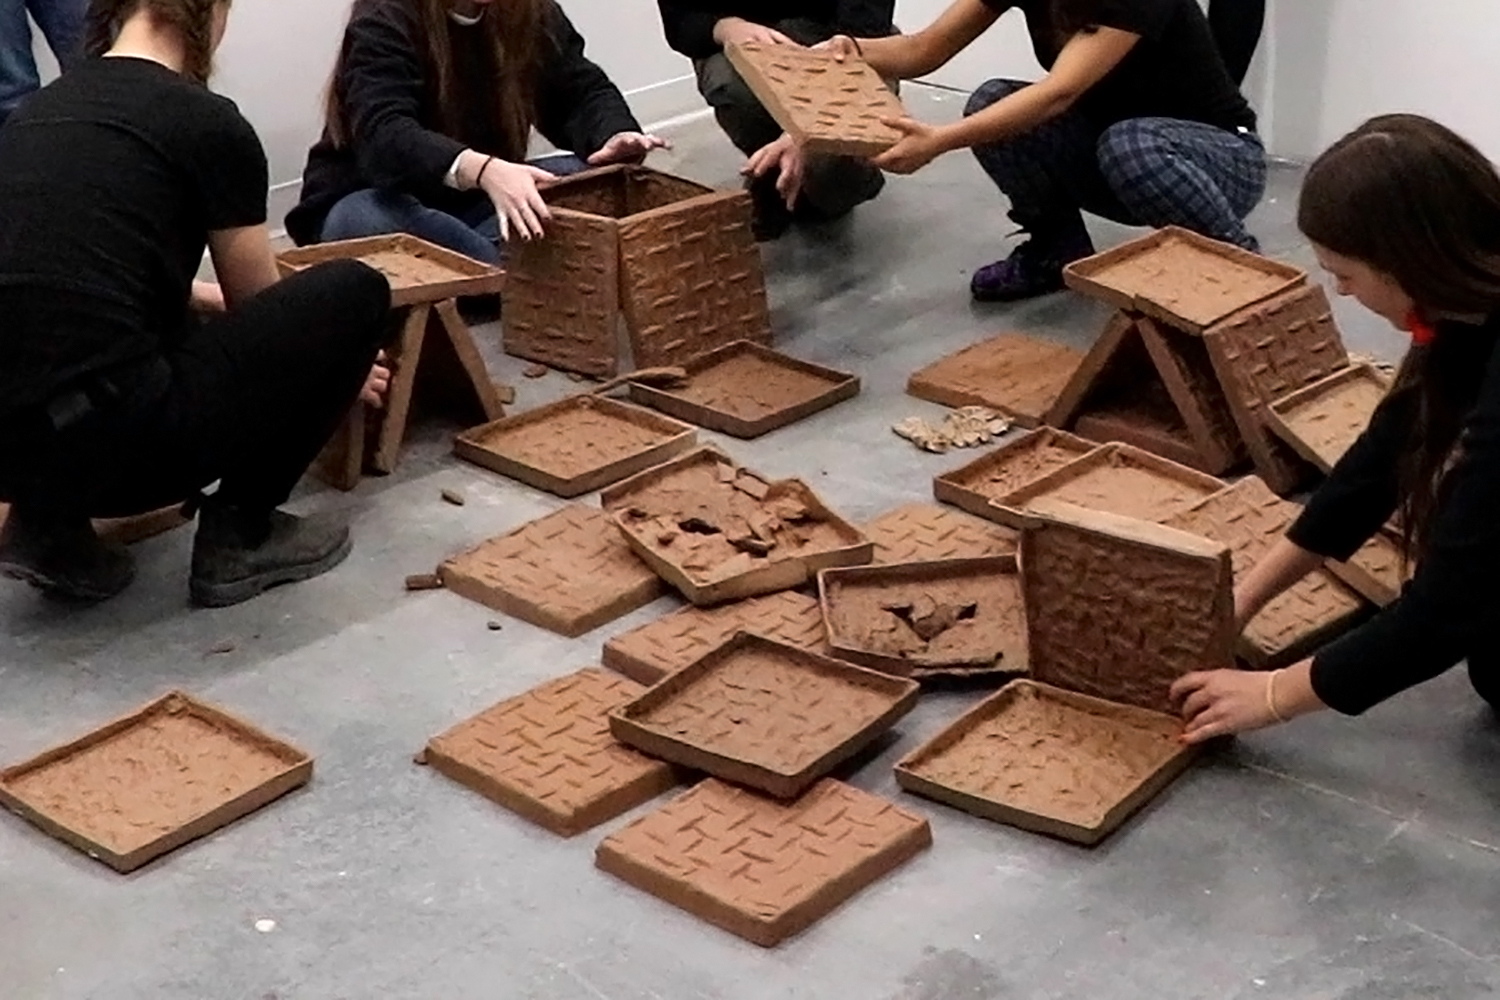 Pick Up a Tile Anna Luth 2020 Performance documentation including 49 unfired clay tiles and viewer participation